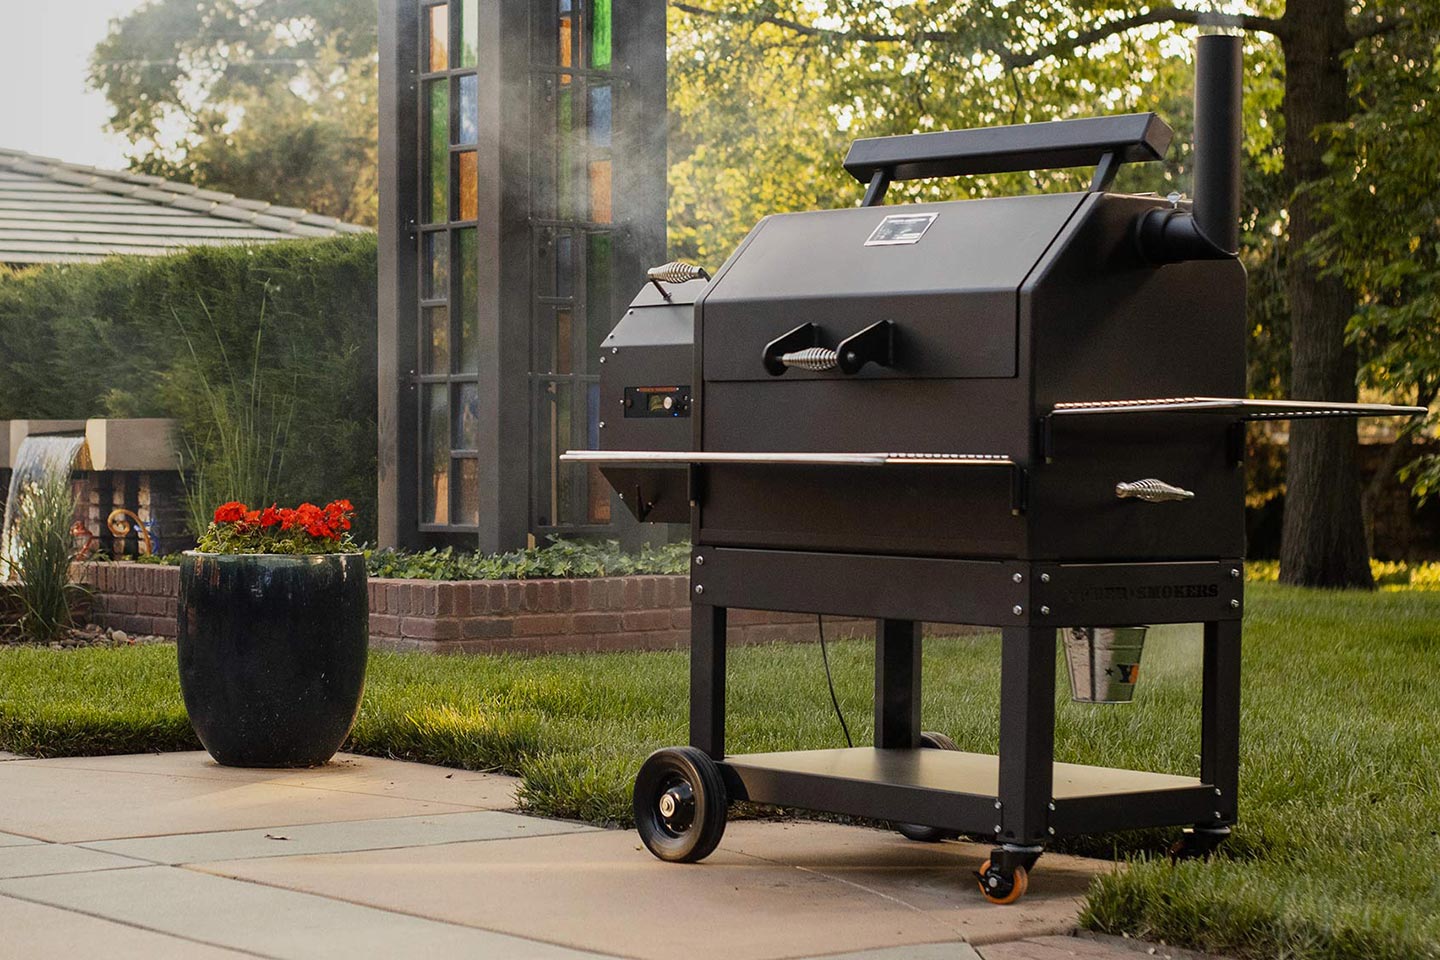 Yoder Smokers YS640S Wins Best Overall Pellet Grill for 2024